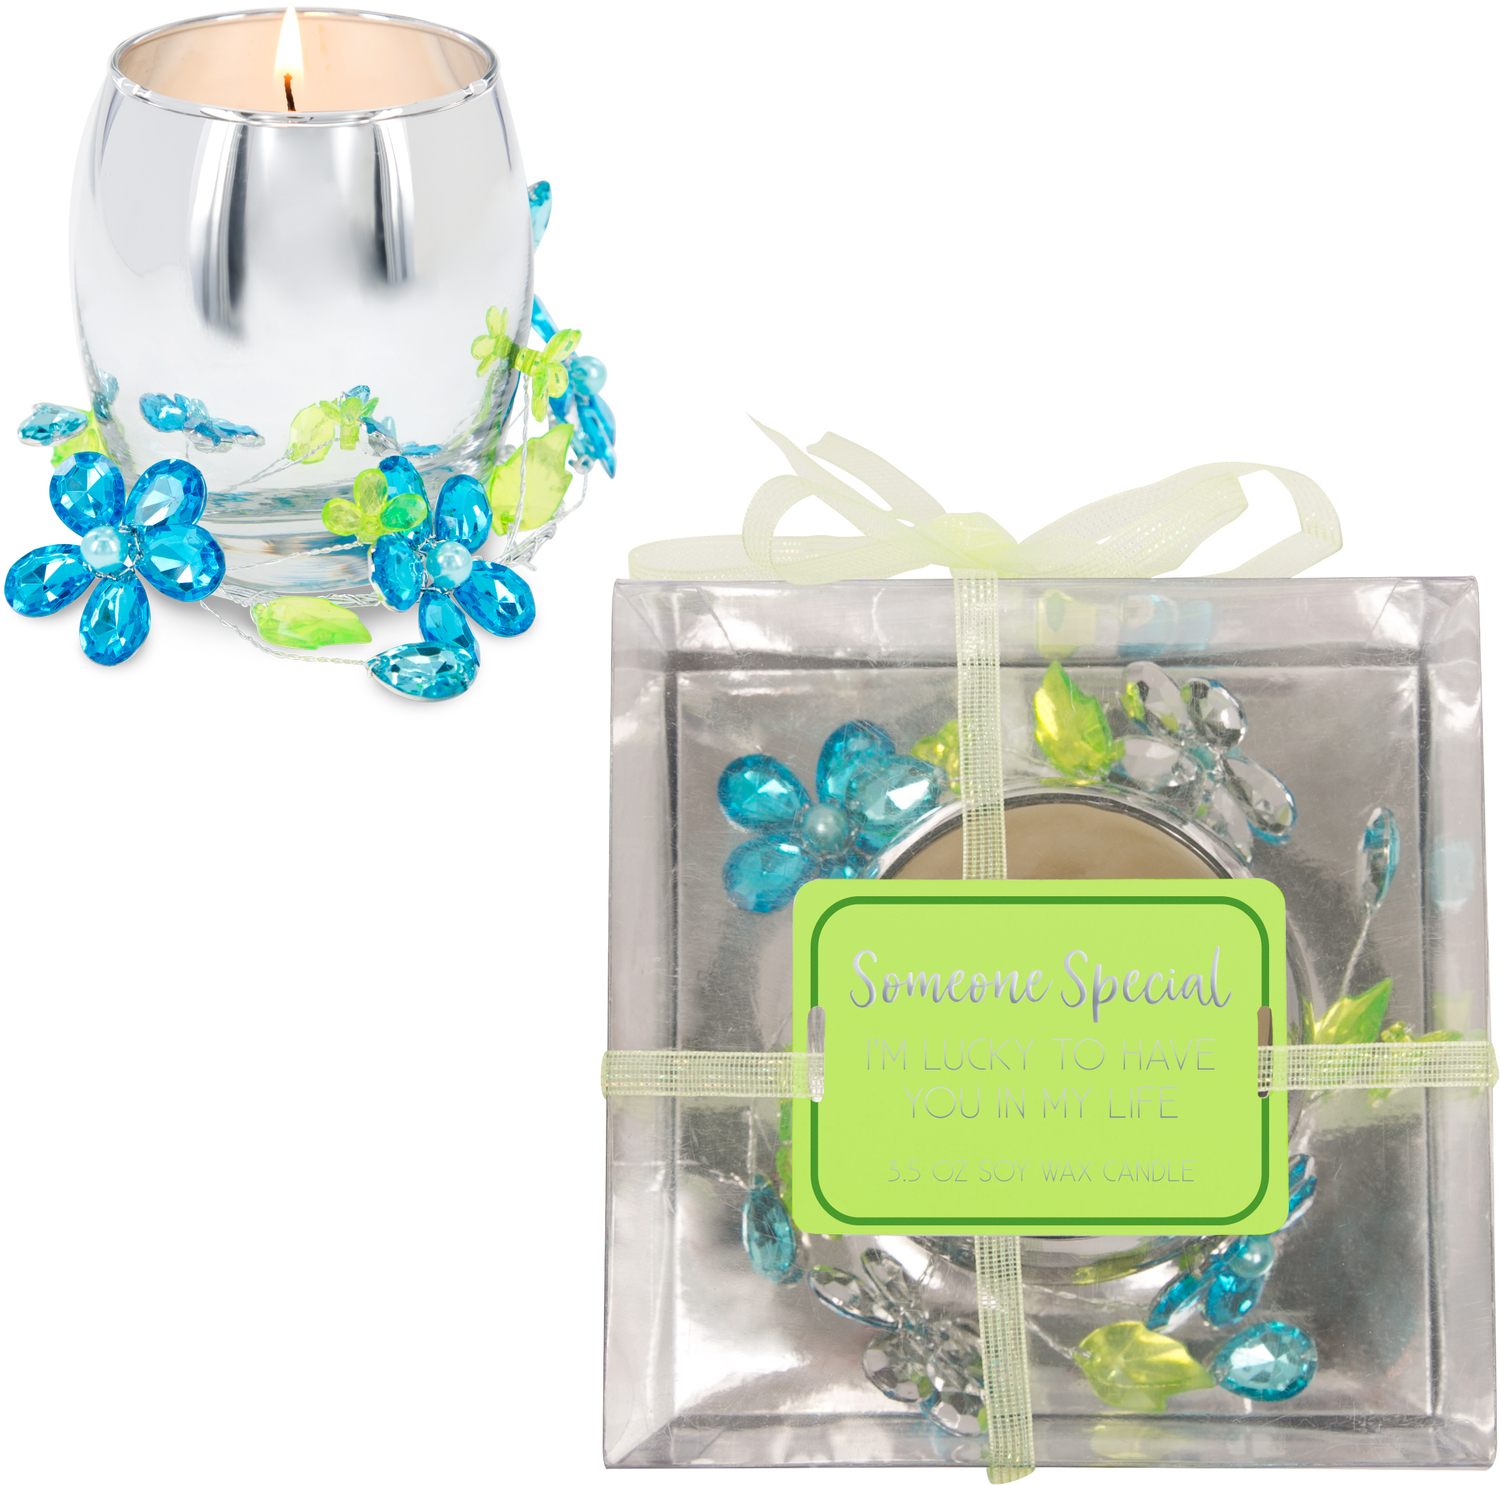 Someone Special
Blue Flower by Reflections of You - Someone Special
Blue Flower - 3.5oz 100% Soy Wax Candle
Scent: Jasmine